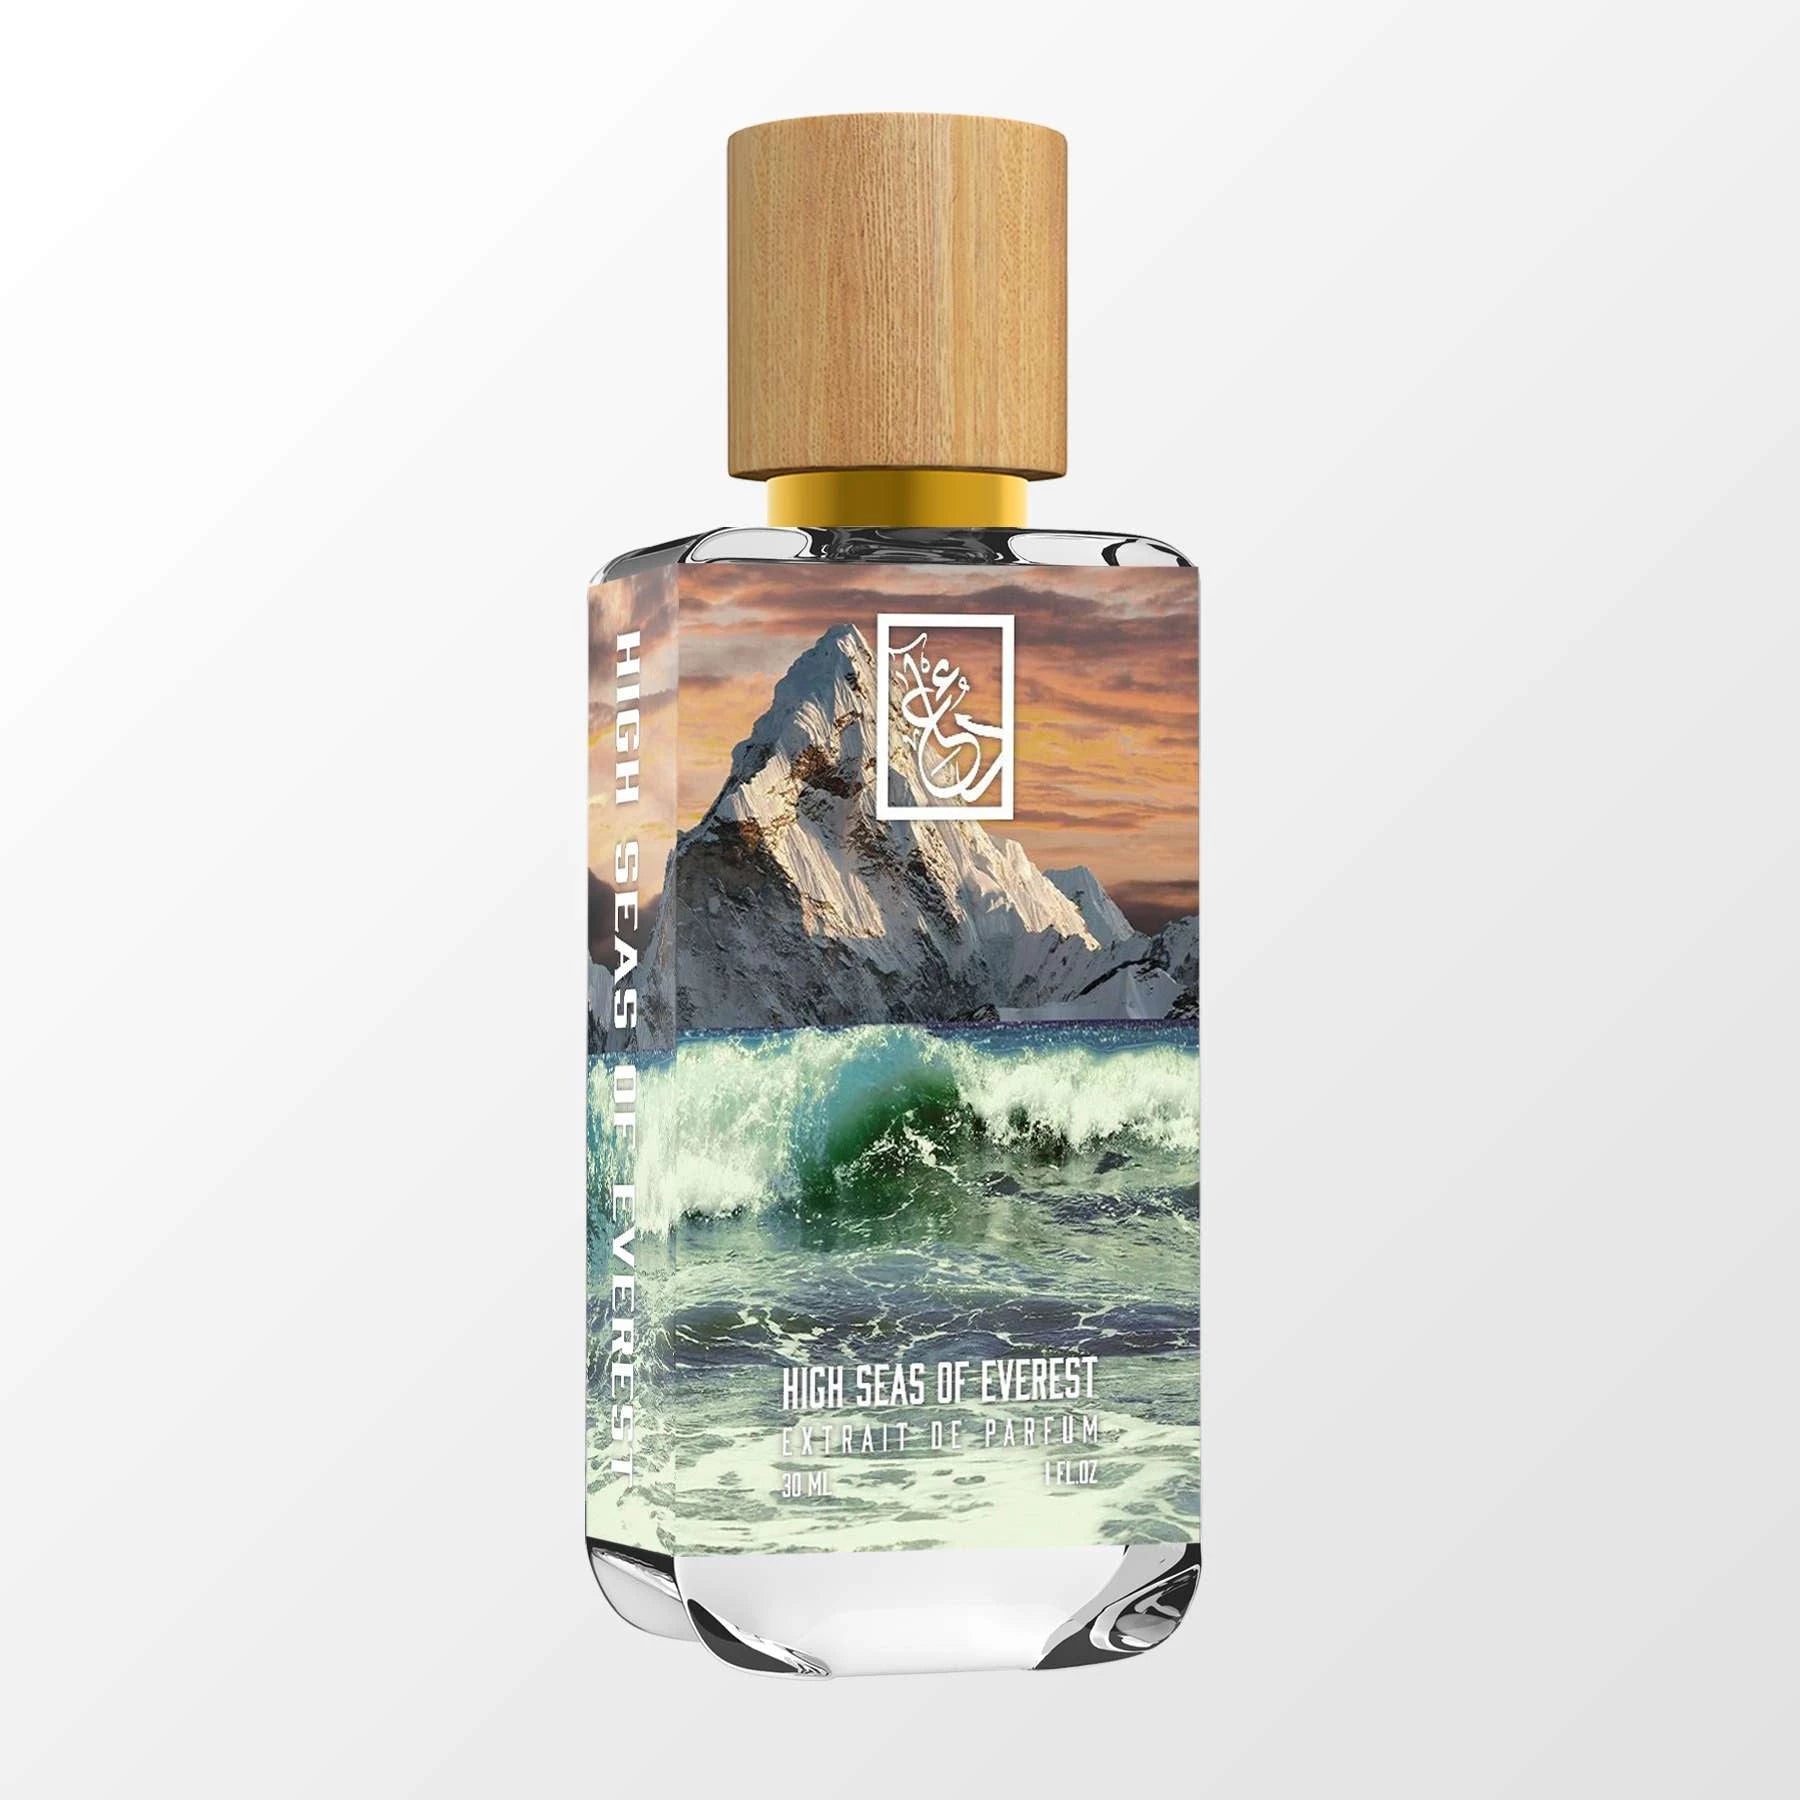 Louis Vuitton embraces adventure with first ever men's fragrance collection